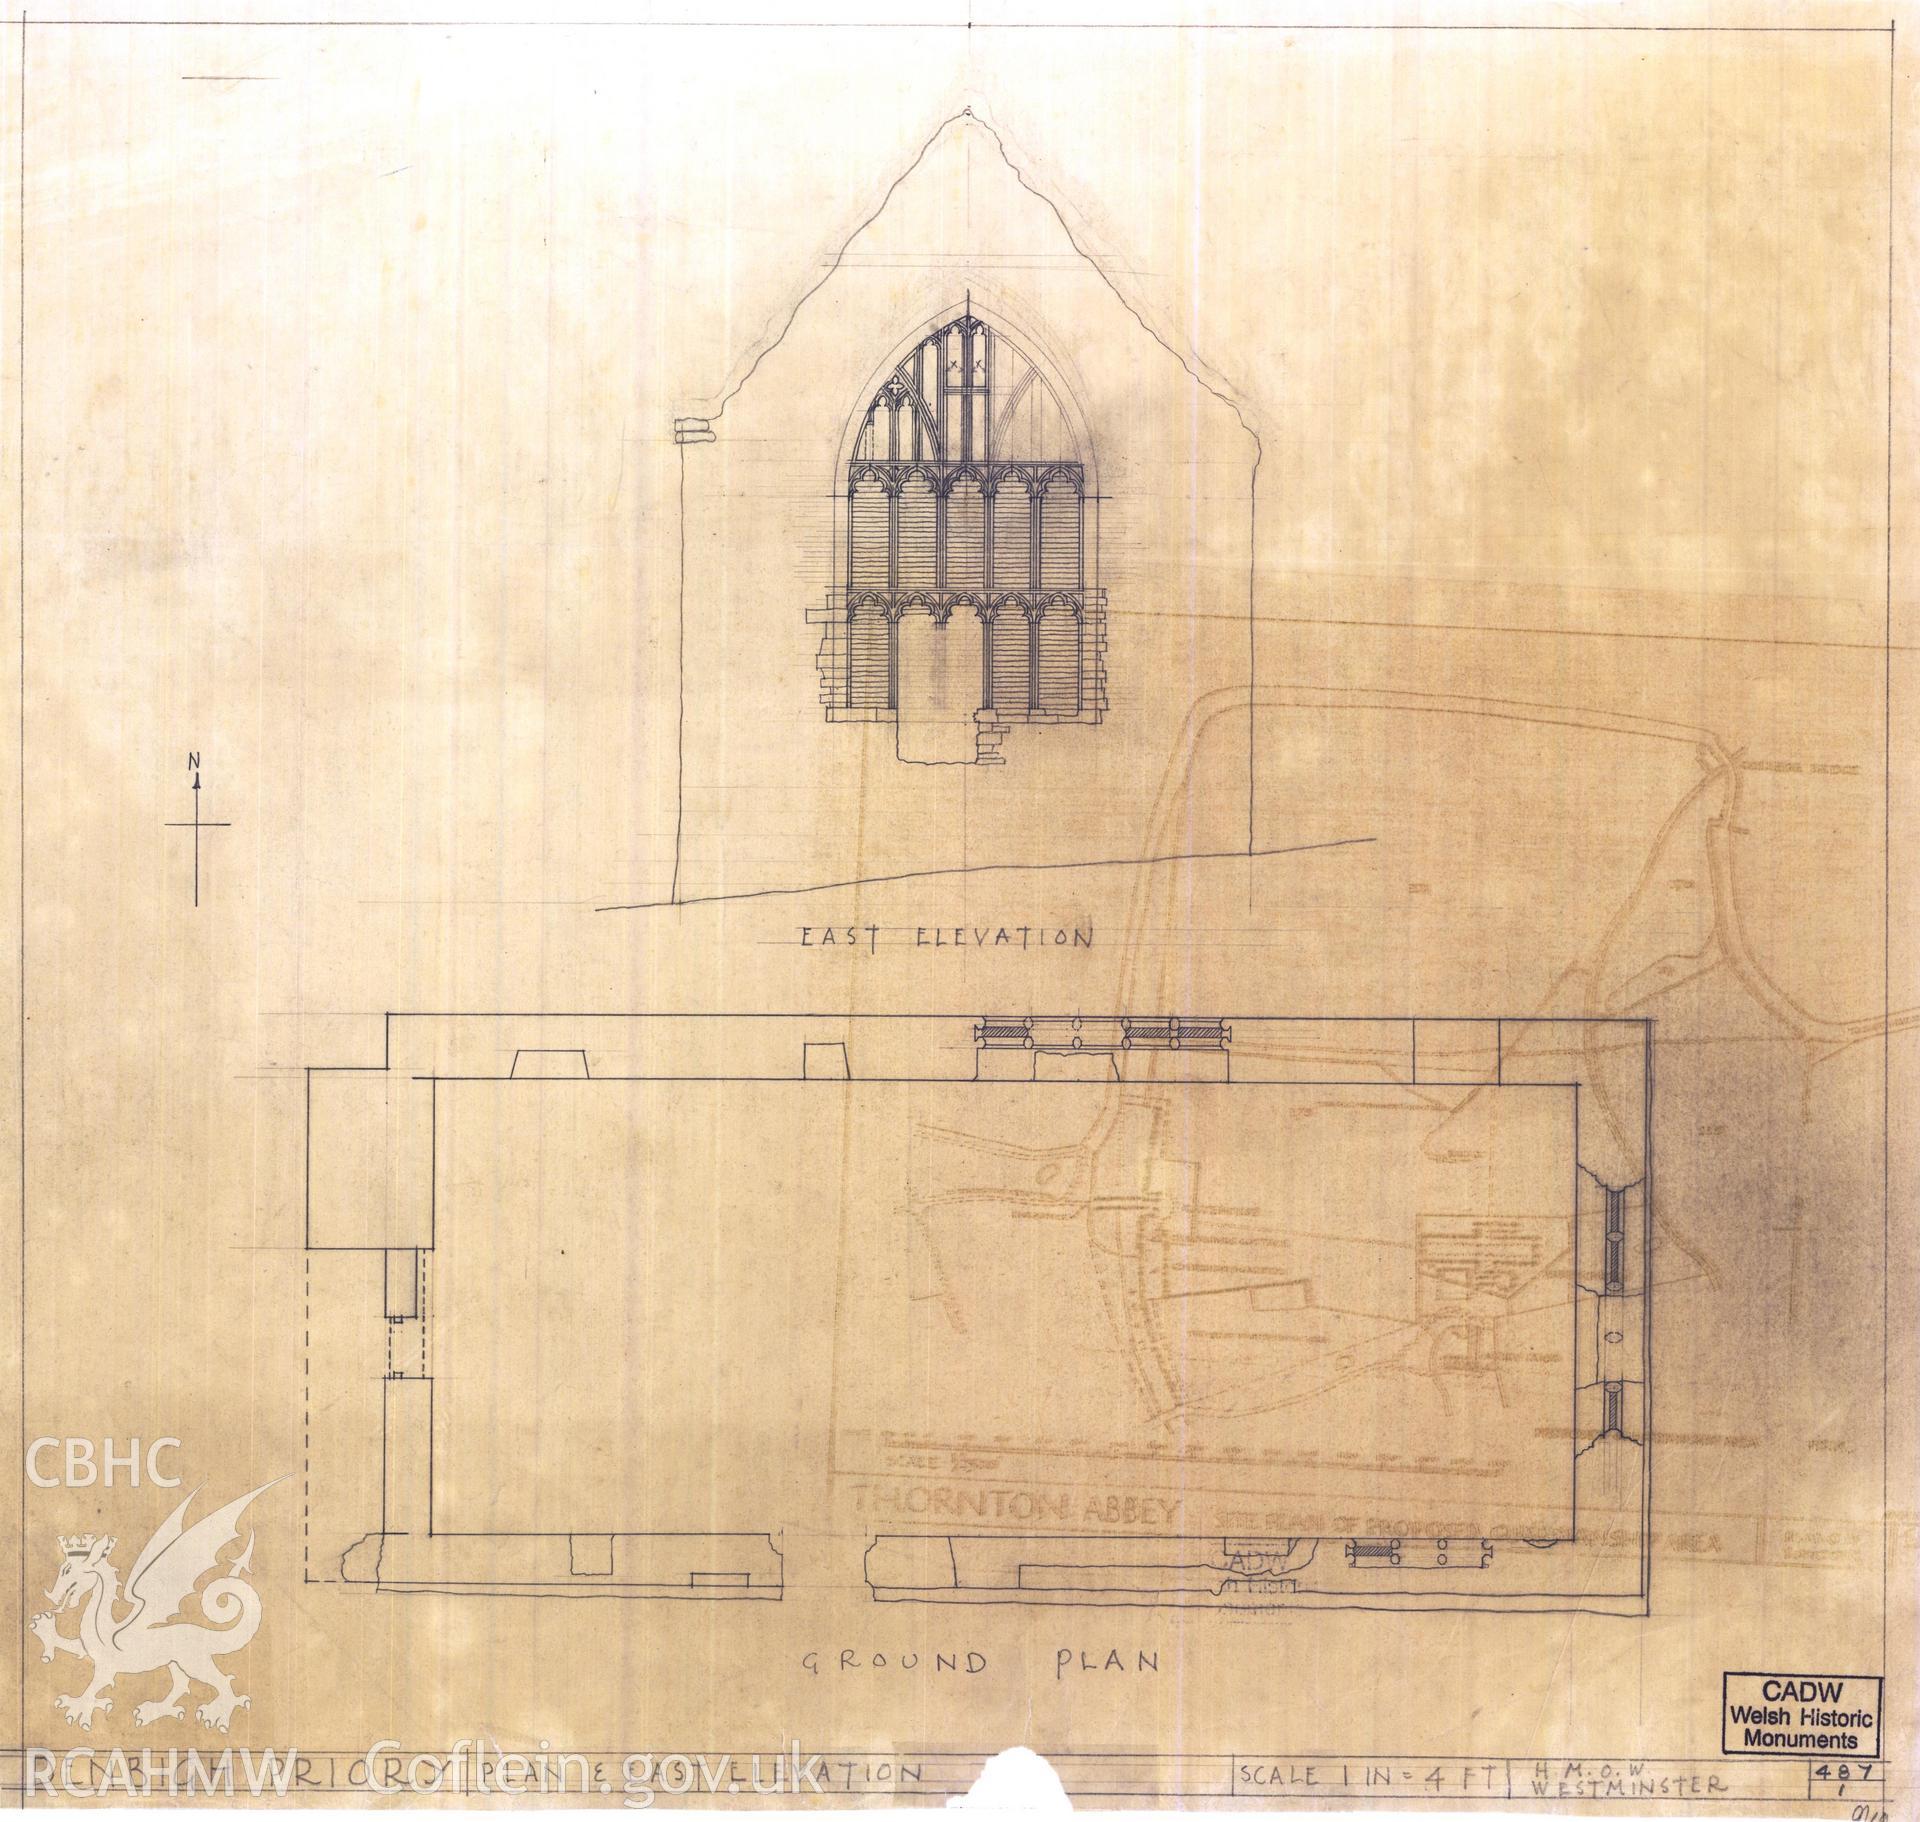 Cadw guardianship monument drawing of Denbigh Friary. Plan + ext E elevation. Cadw Ref. No:487/1. Scale 1:48.